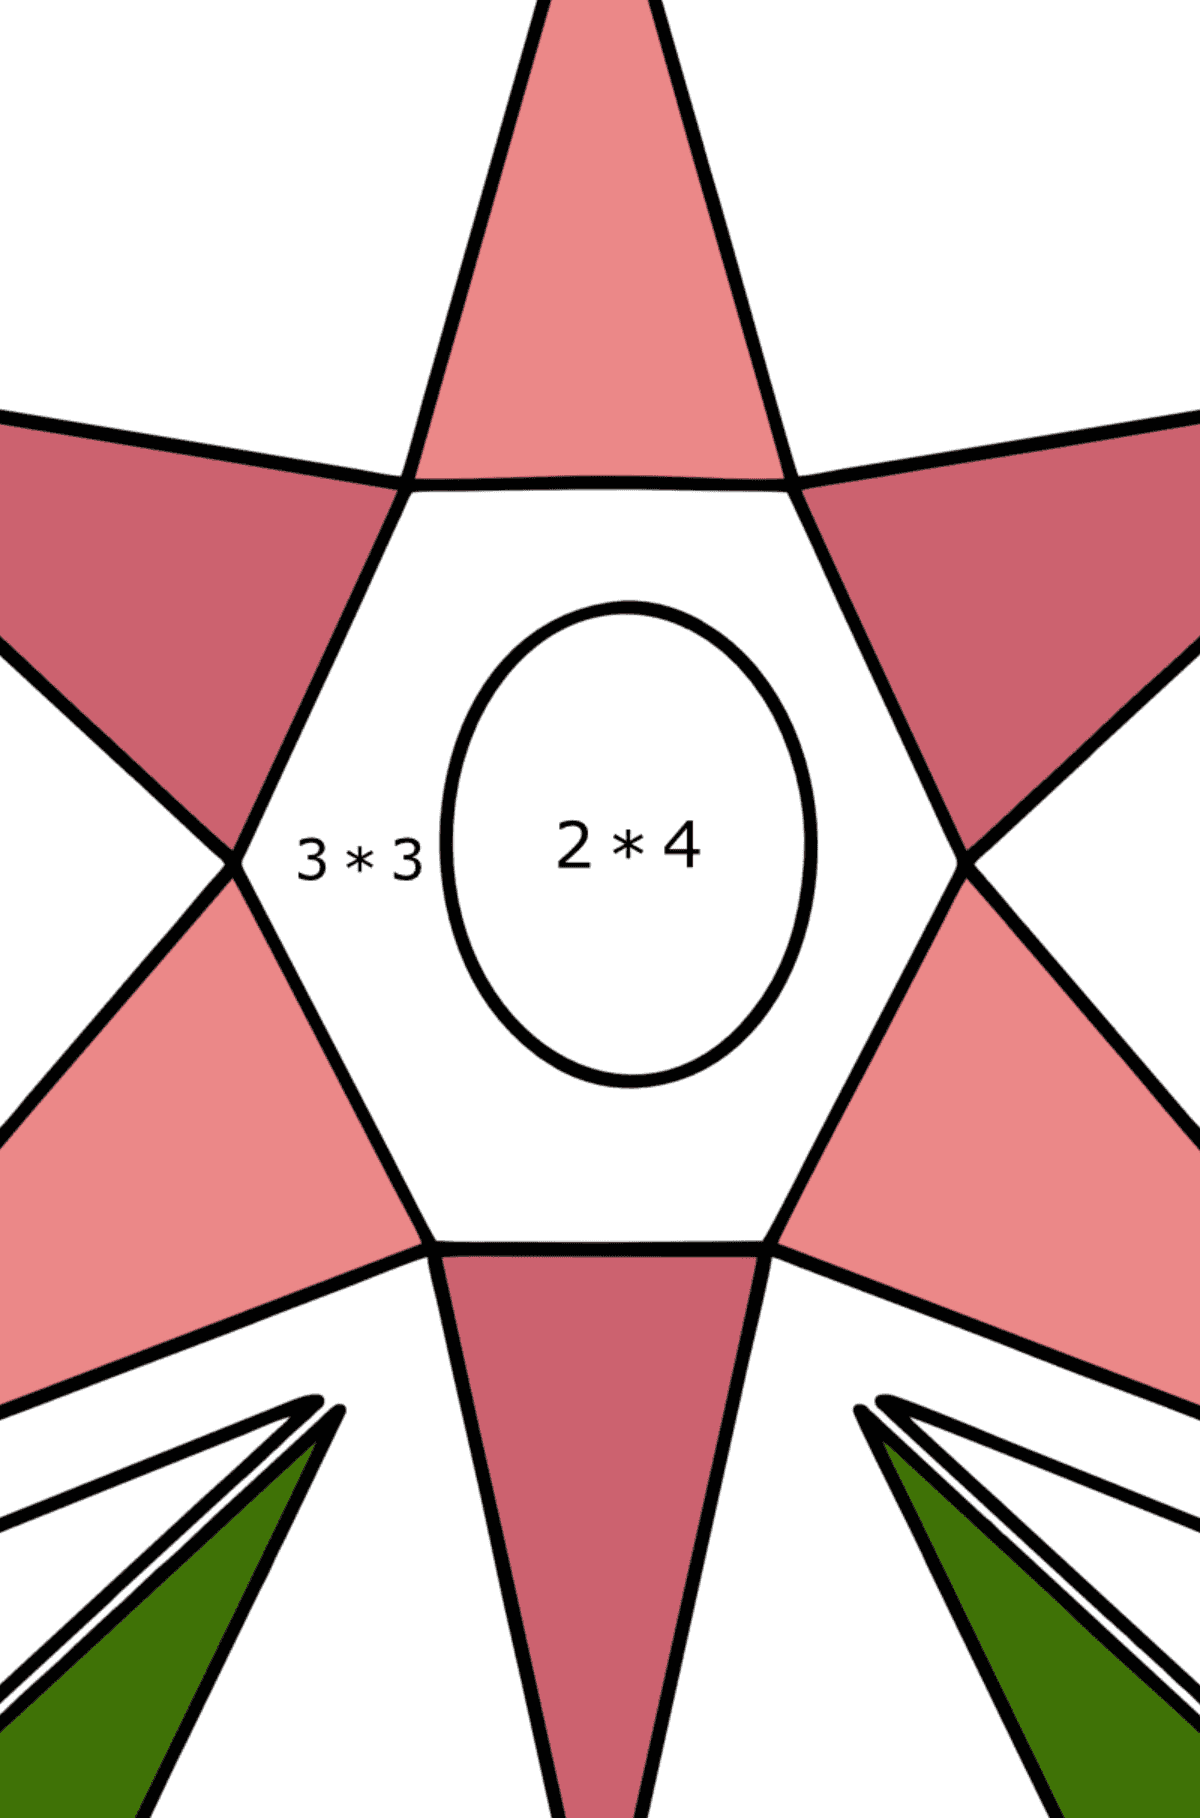 Coloring page - aster from geometric shapes - Math Coloring - Multiplication for Kids